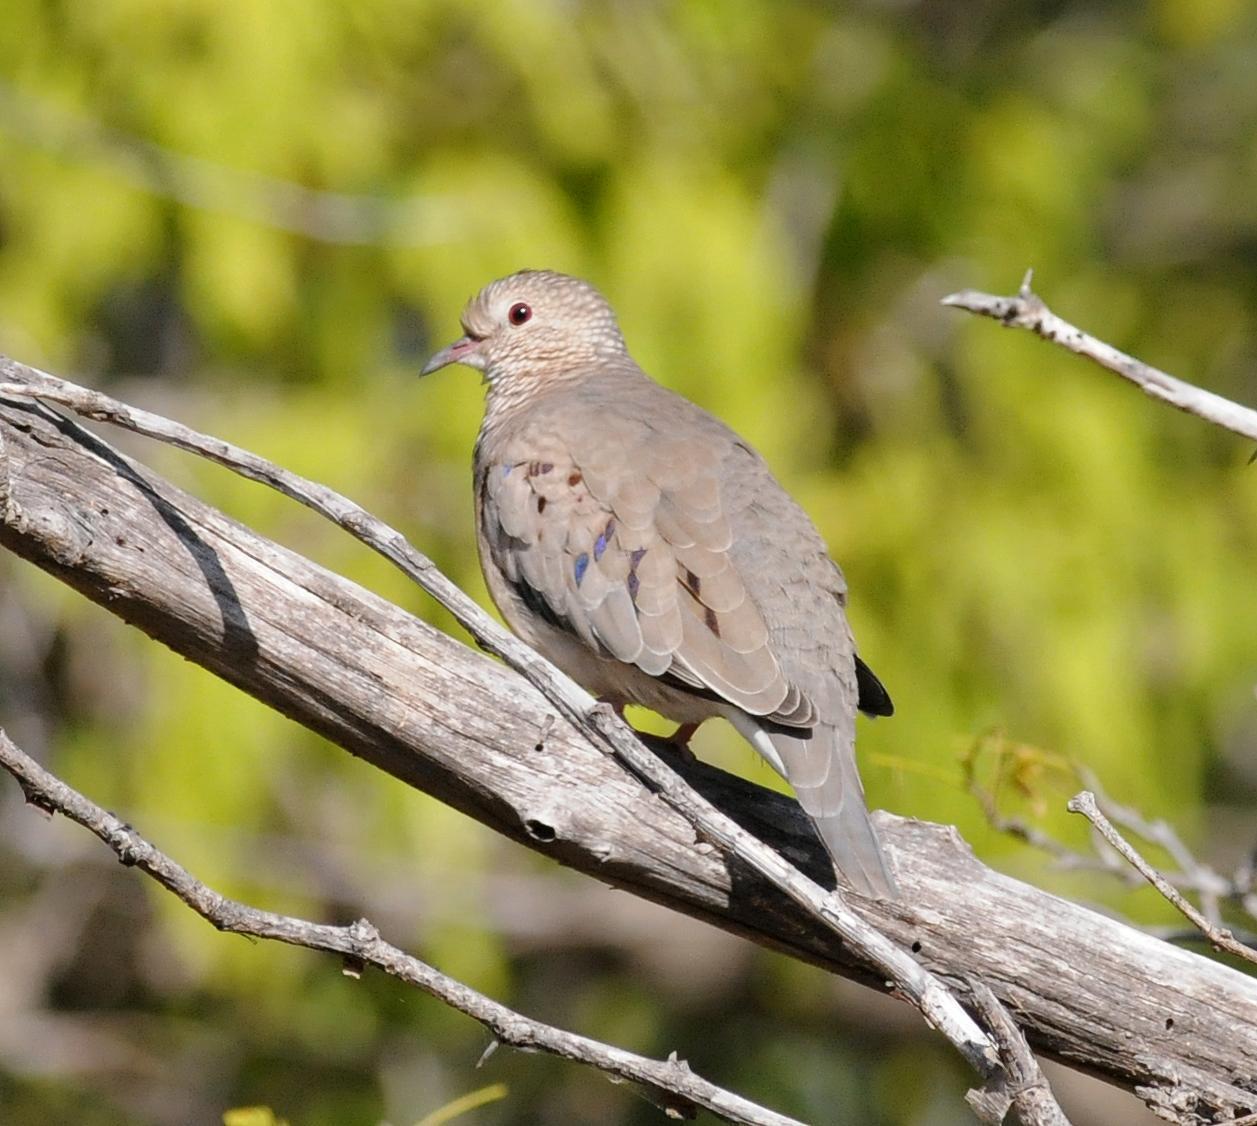 Common Ground Dove Photo by Steven Mlodinow